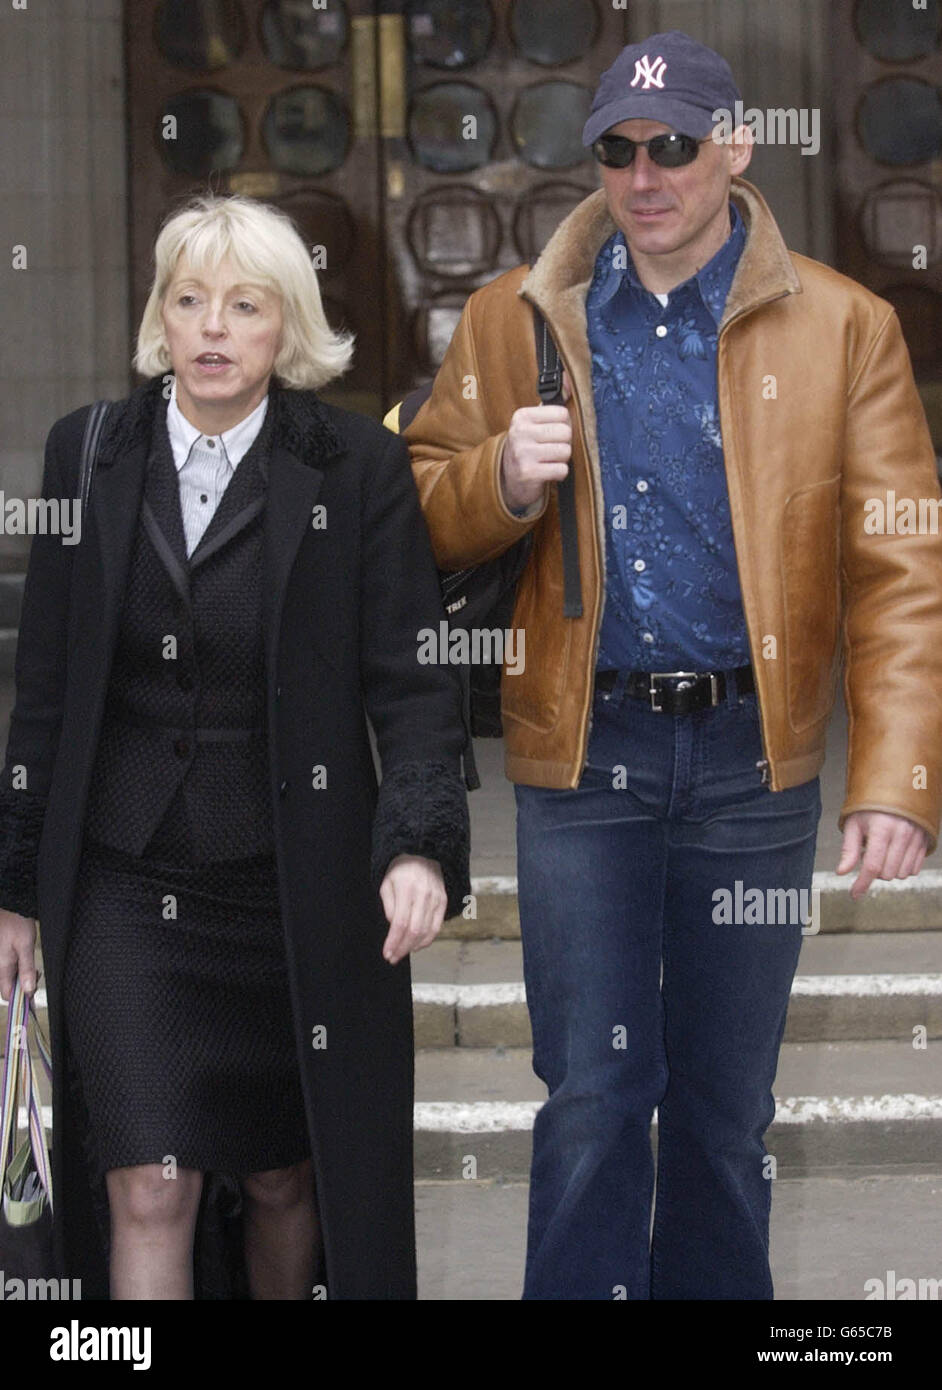 Businessman, Pepe Parra with a legal representative, leaving the High Court, London, after taking his former wife to court because he was awarded less than half their 2.5 million marriage assets today won his battle for equality. * Pepe Parra had argued in the Court of Appeal that a High Court settlement meant that his former wife Yvonne would have net liquid assets of more than 800,000 and a mortgage-free house while he would spend the next 20 years working to pay off debts of around 1 million. Stock Photo